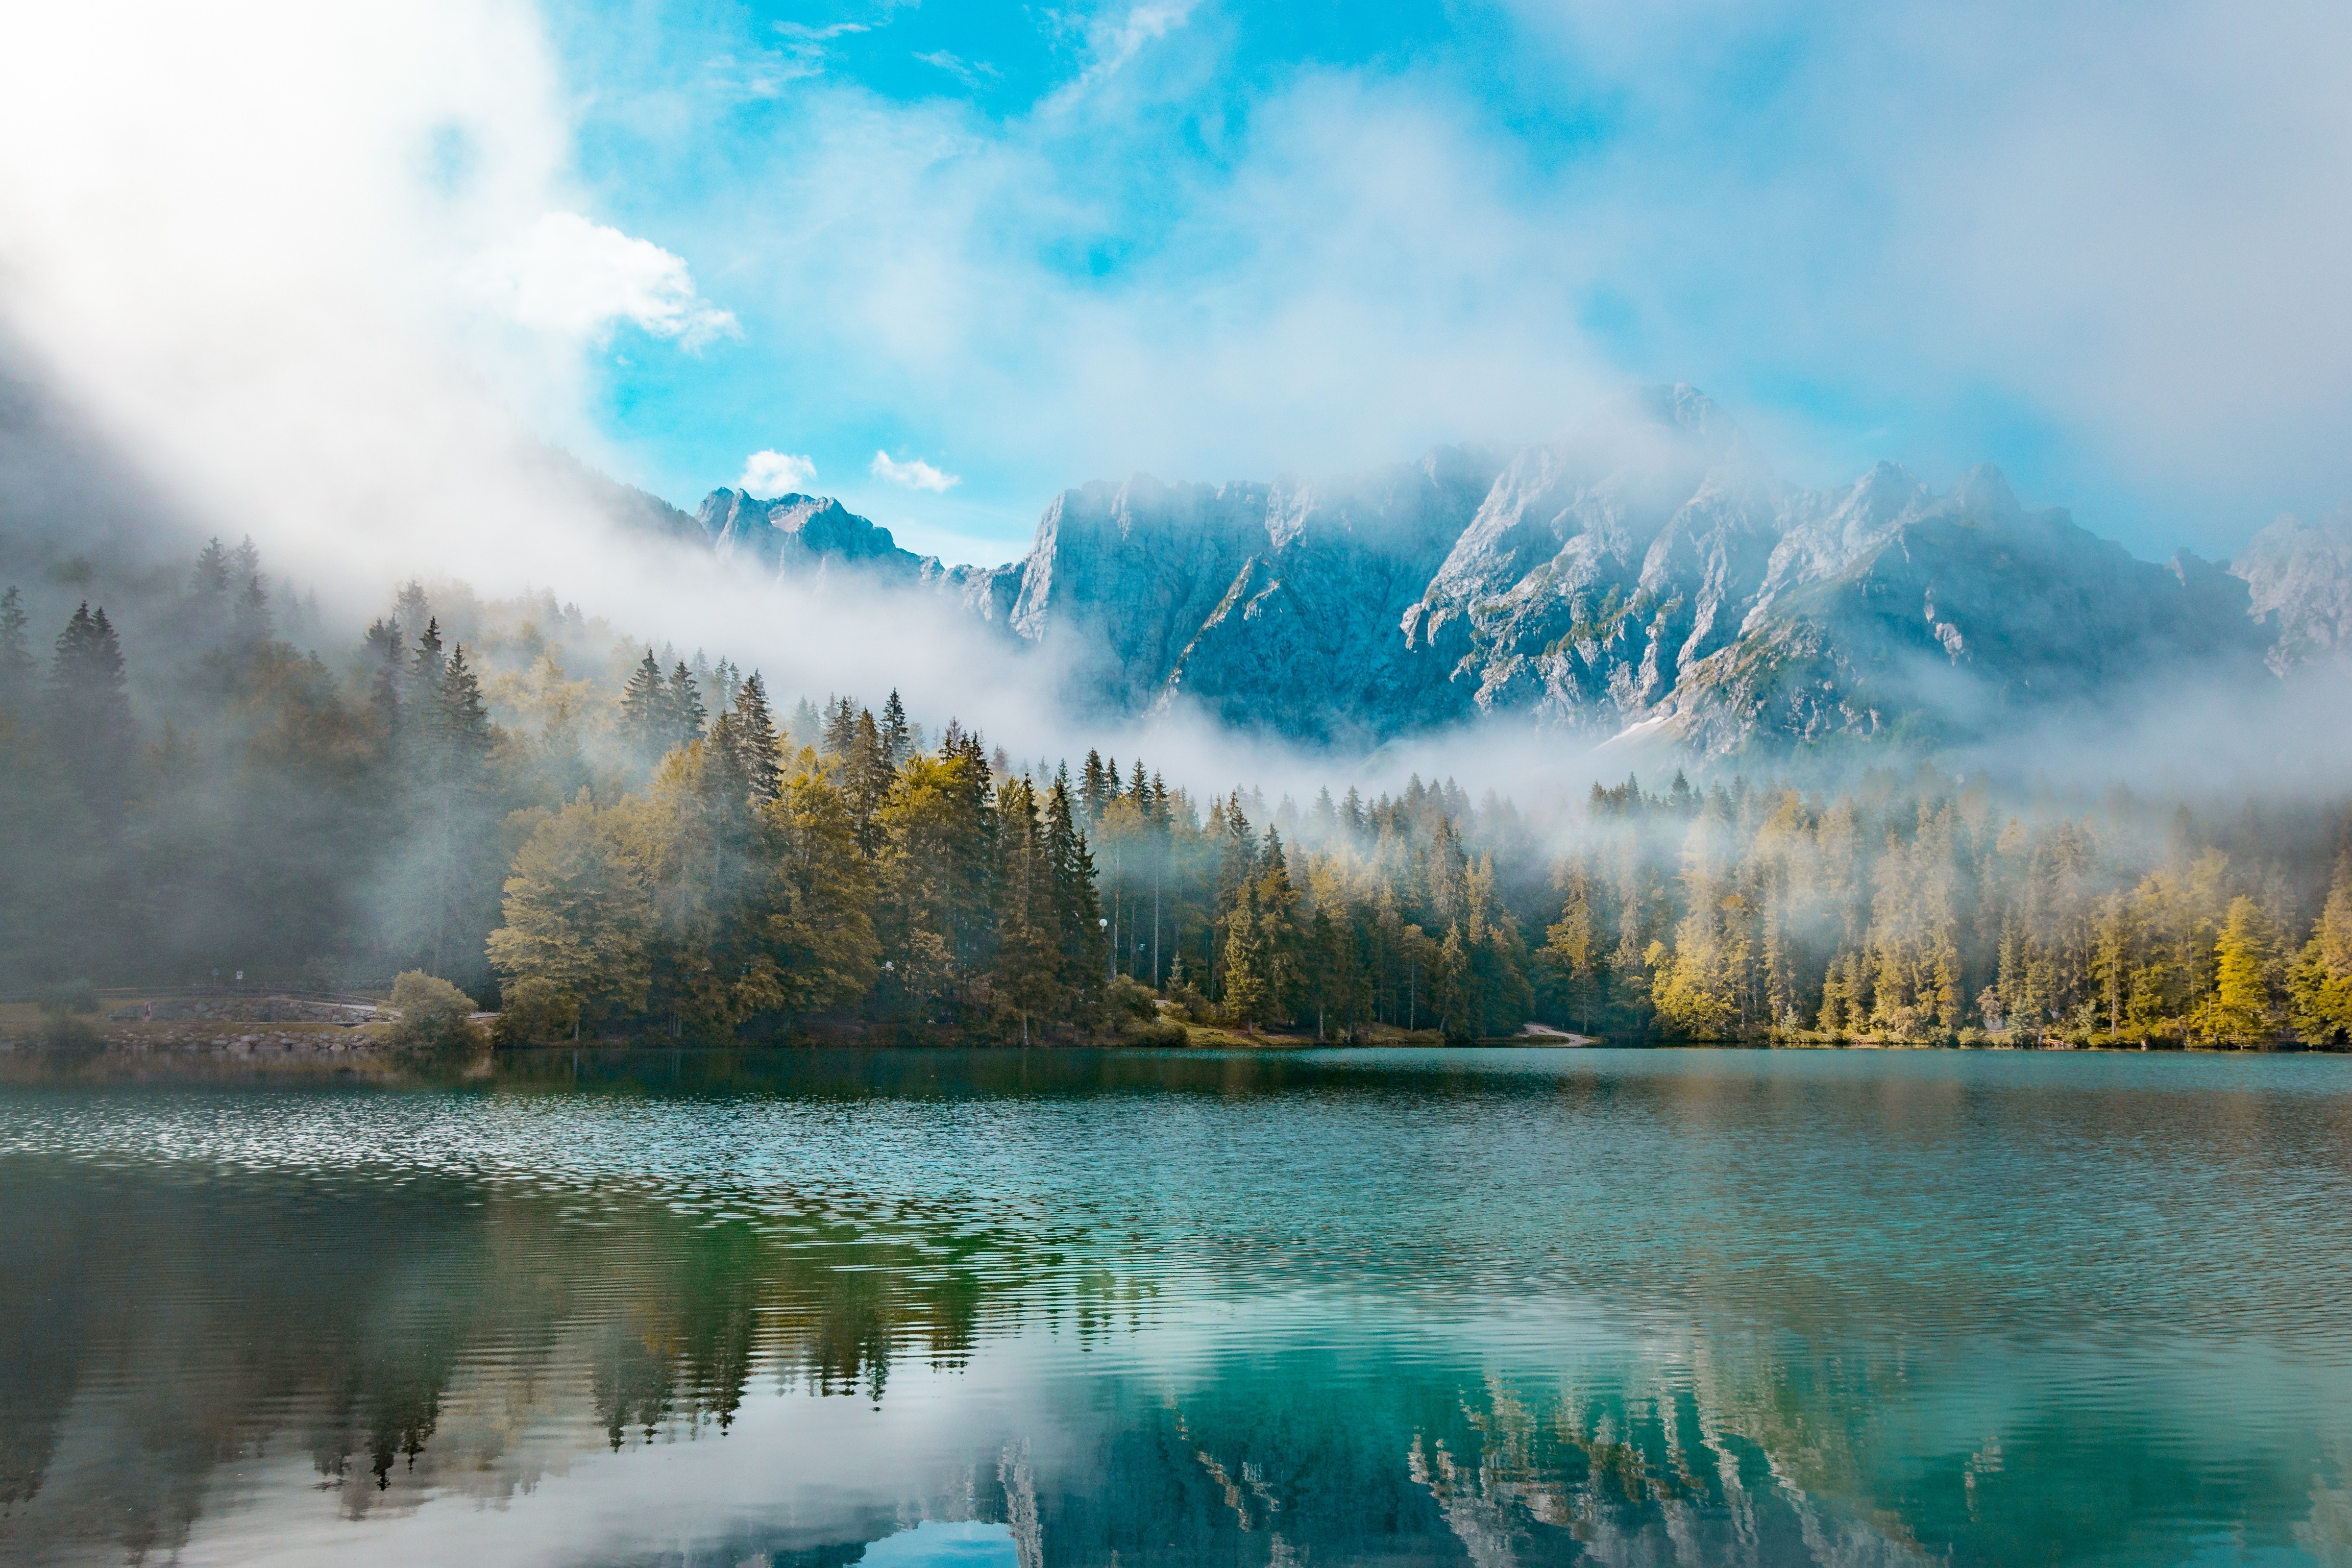 A misty lake in the mountains